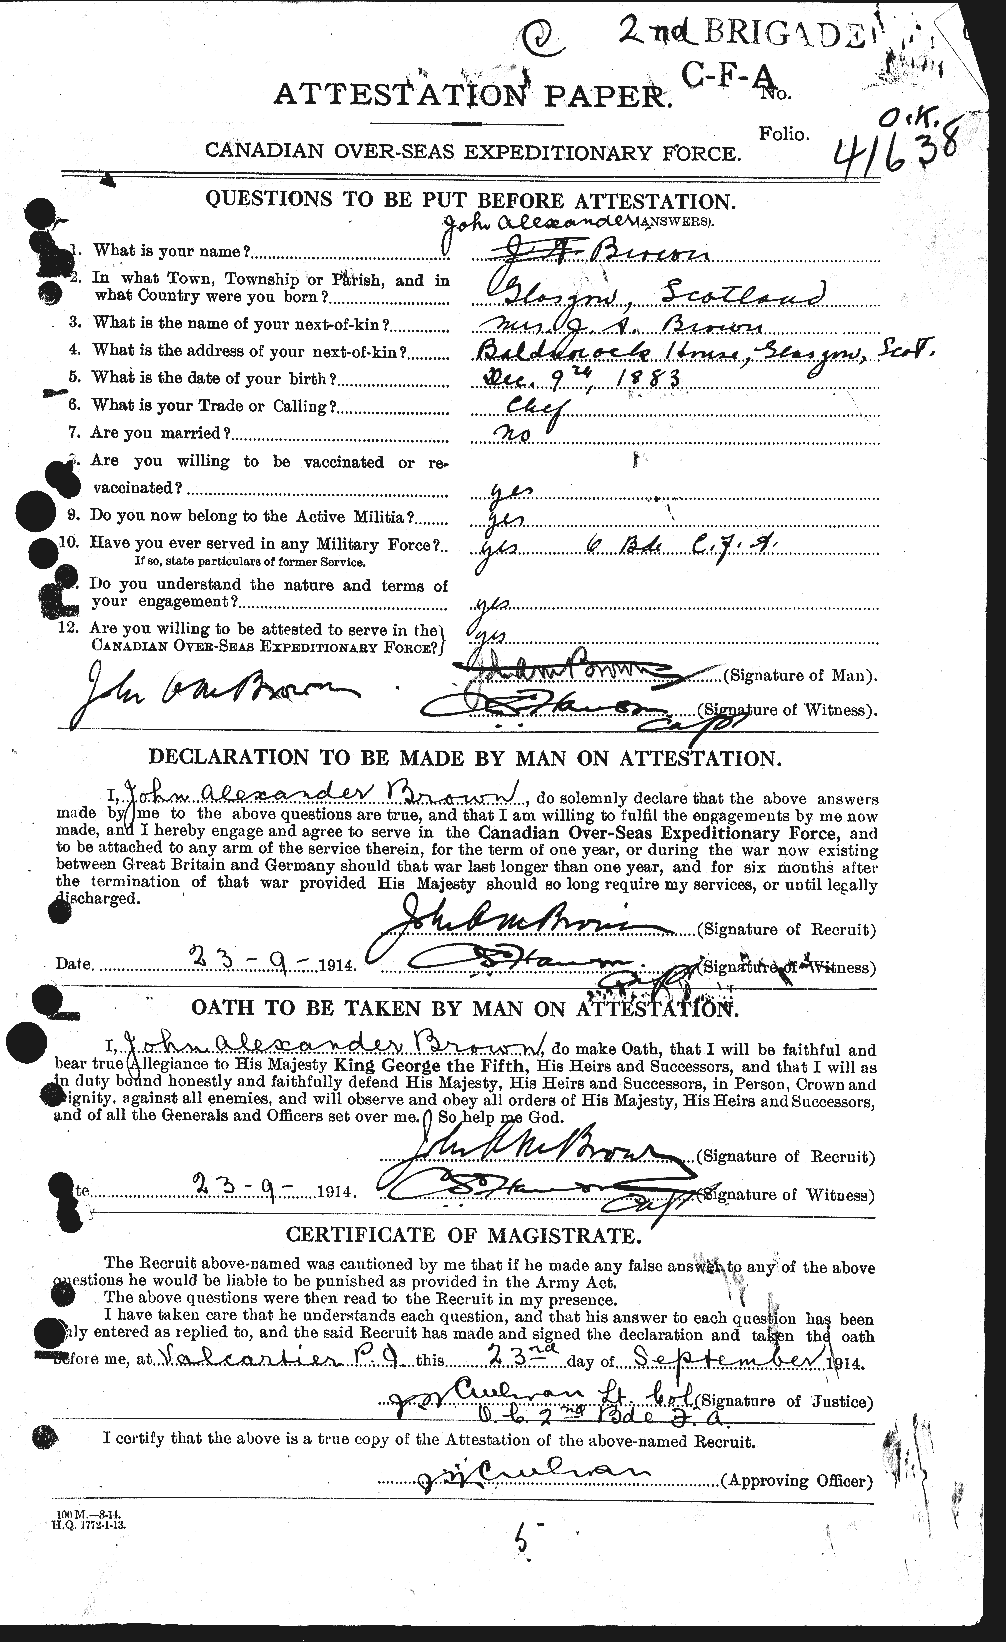 Personnel Records of the First World War - CEF 264560a